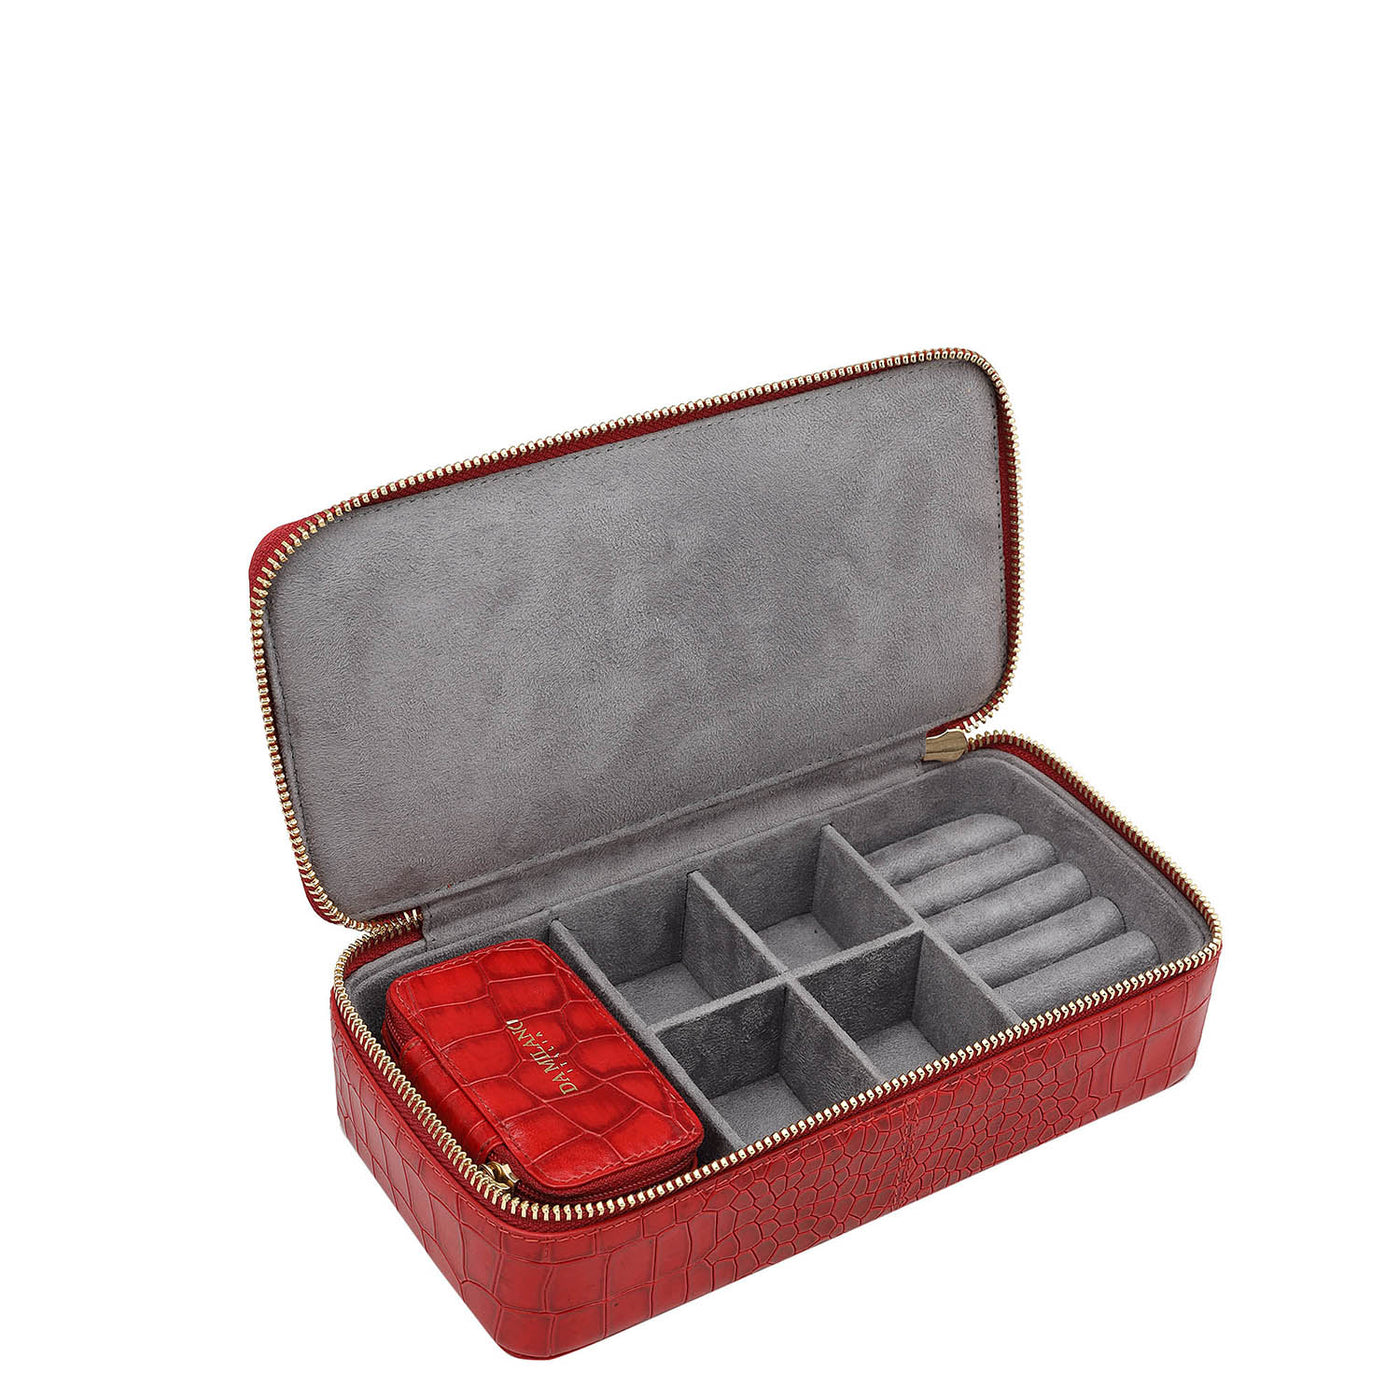 Croco Leather Jewellery Case - Red